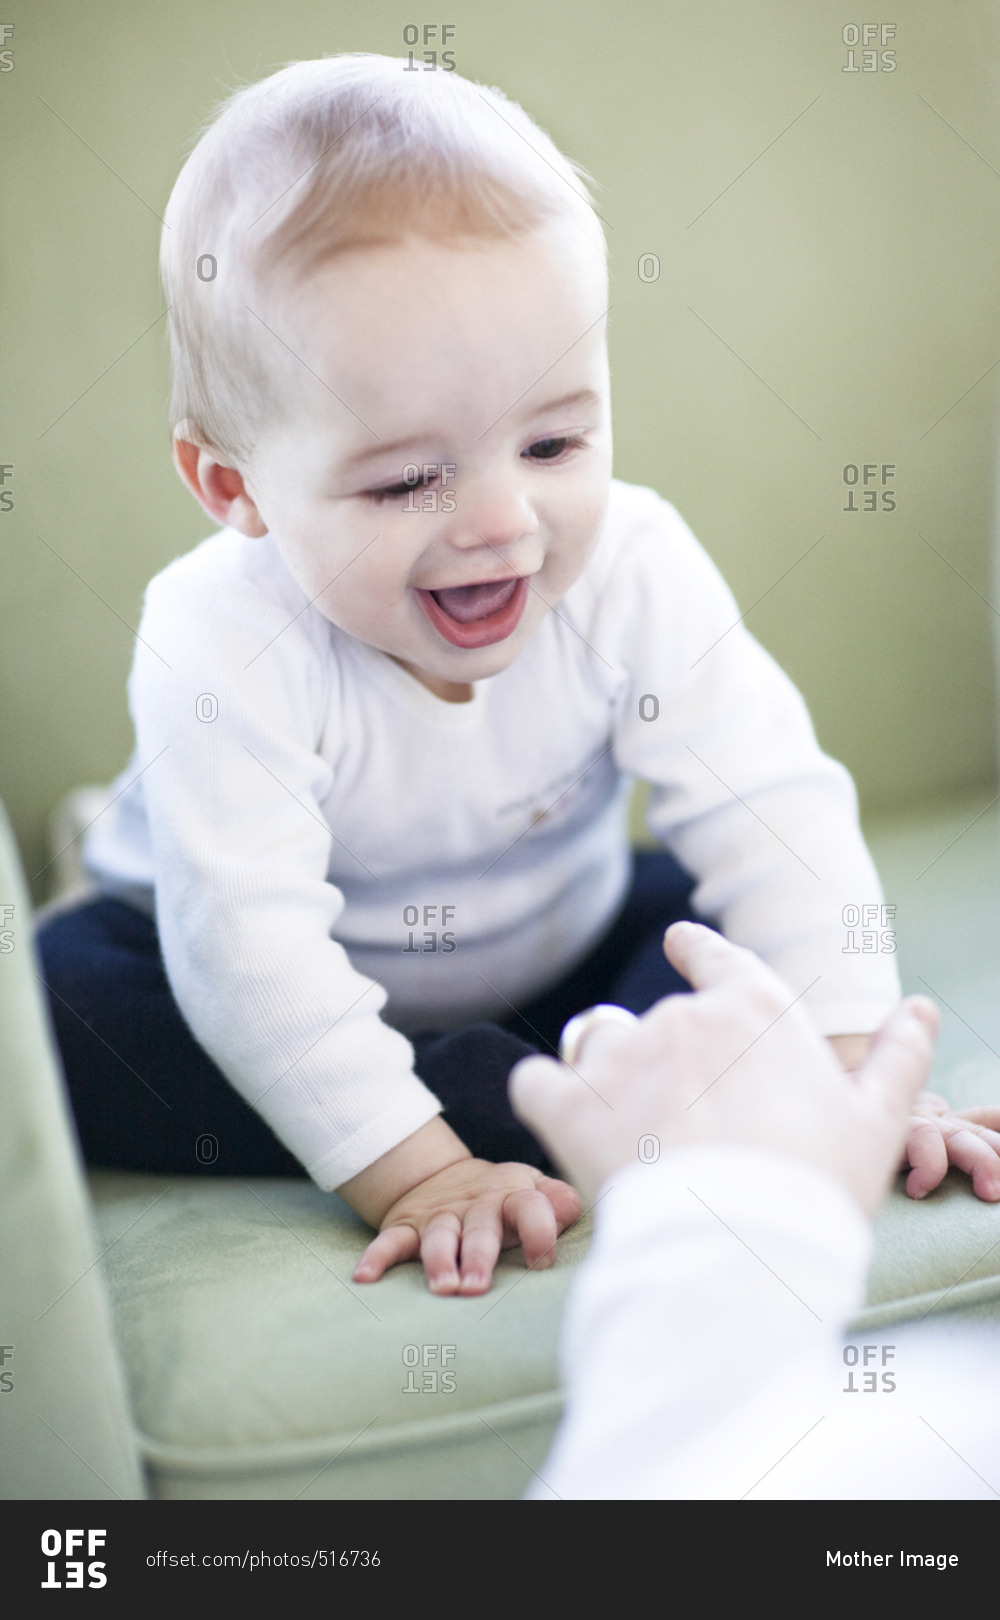 Baby boy smiling on rocking chair playing with adult poking finger at him